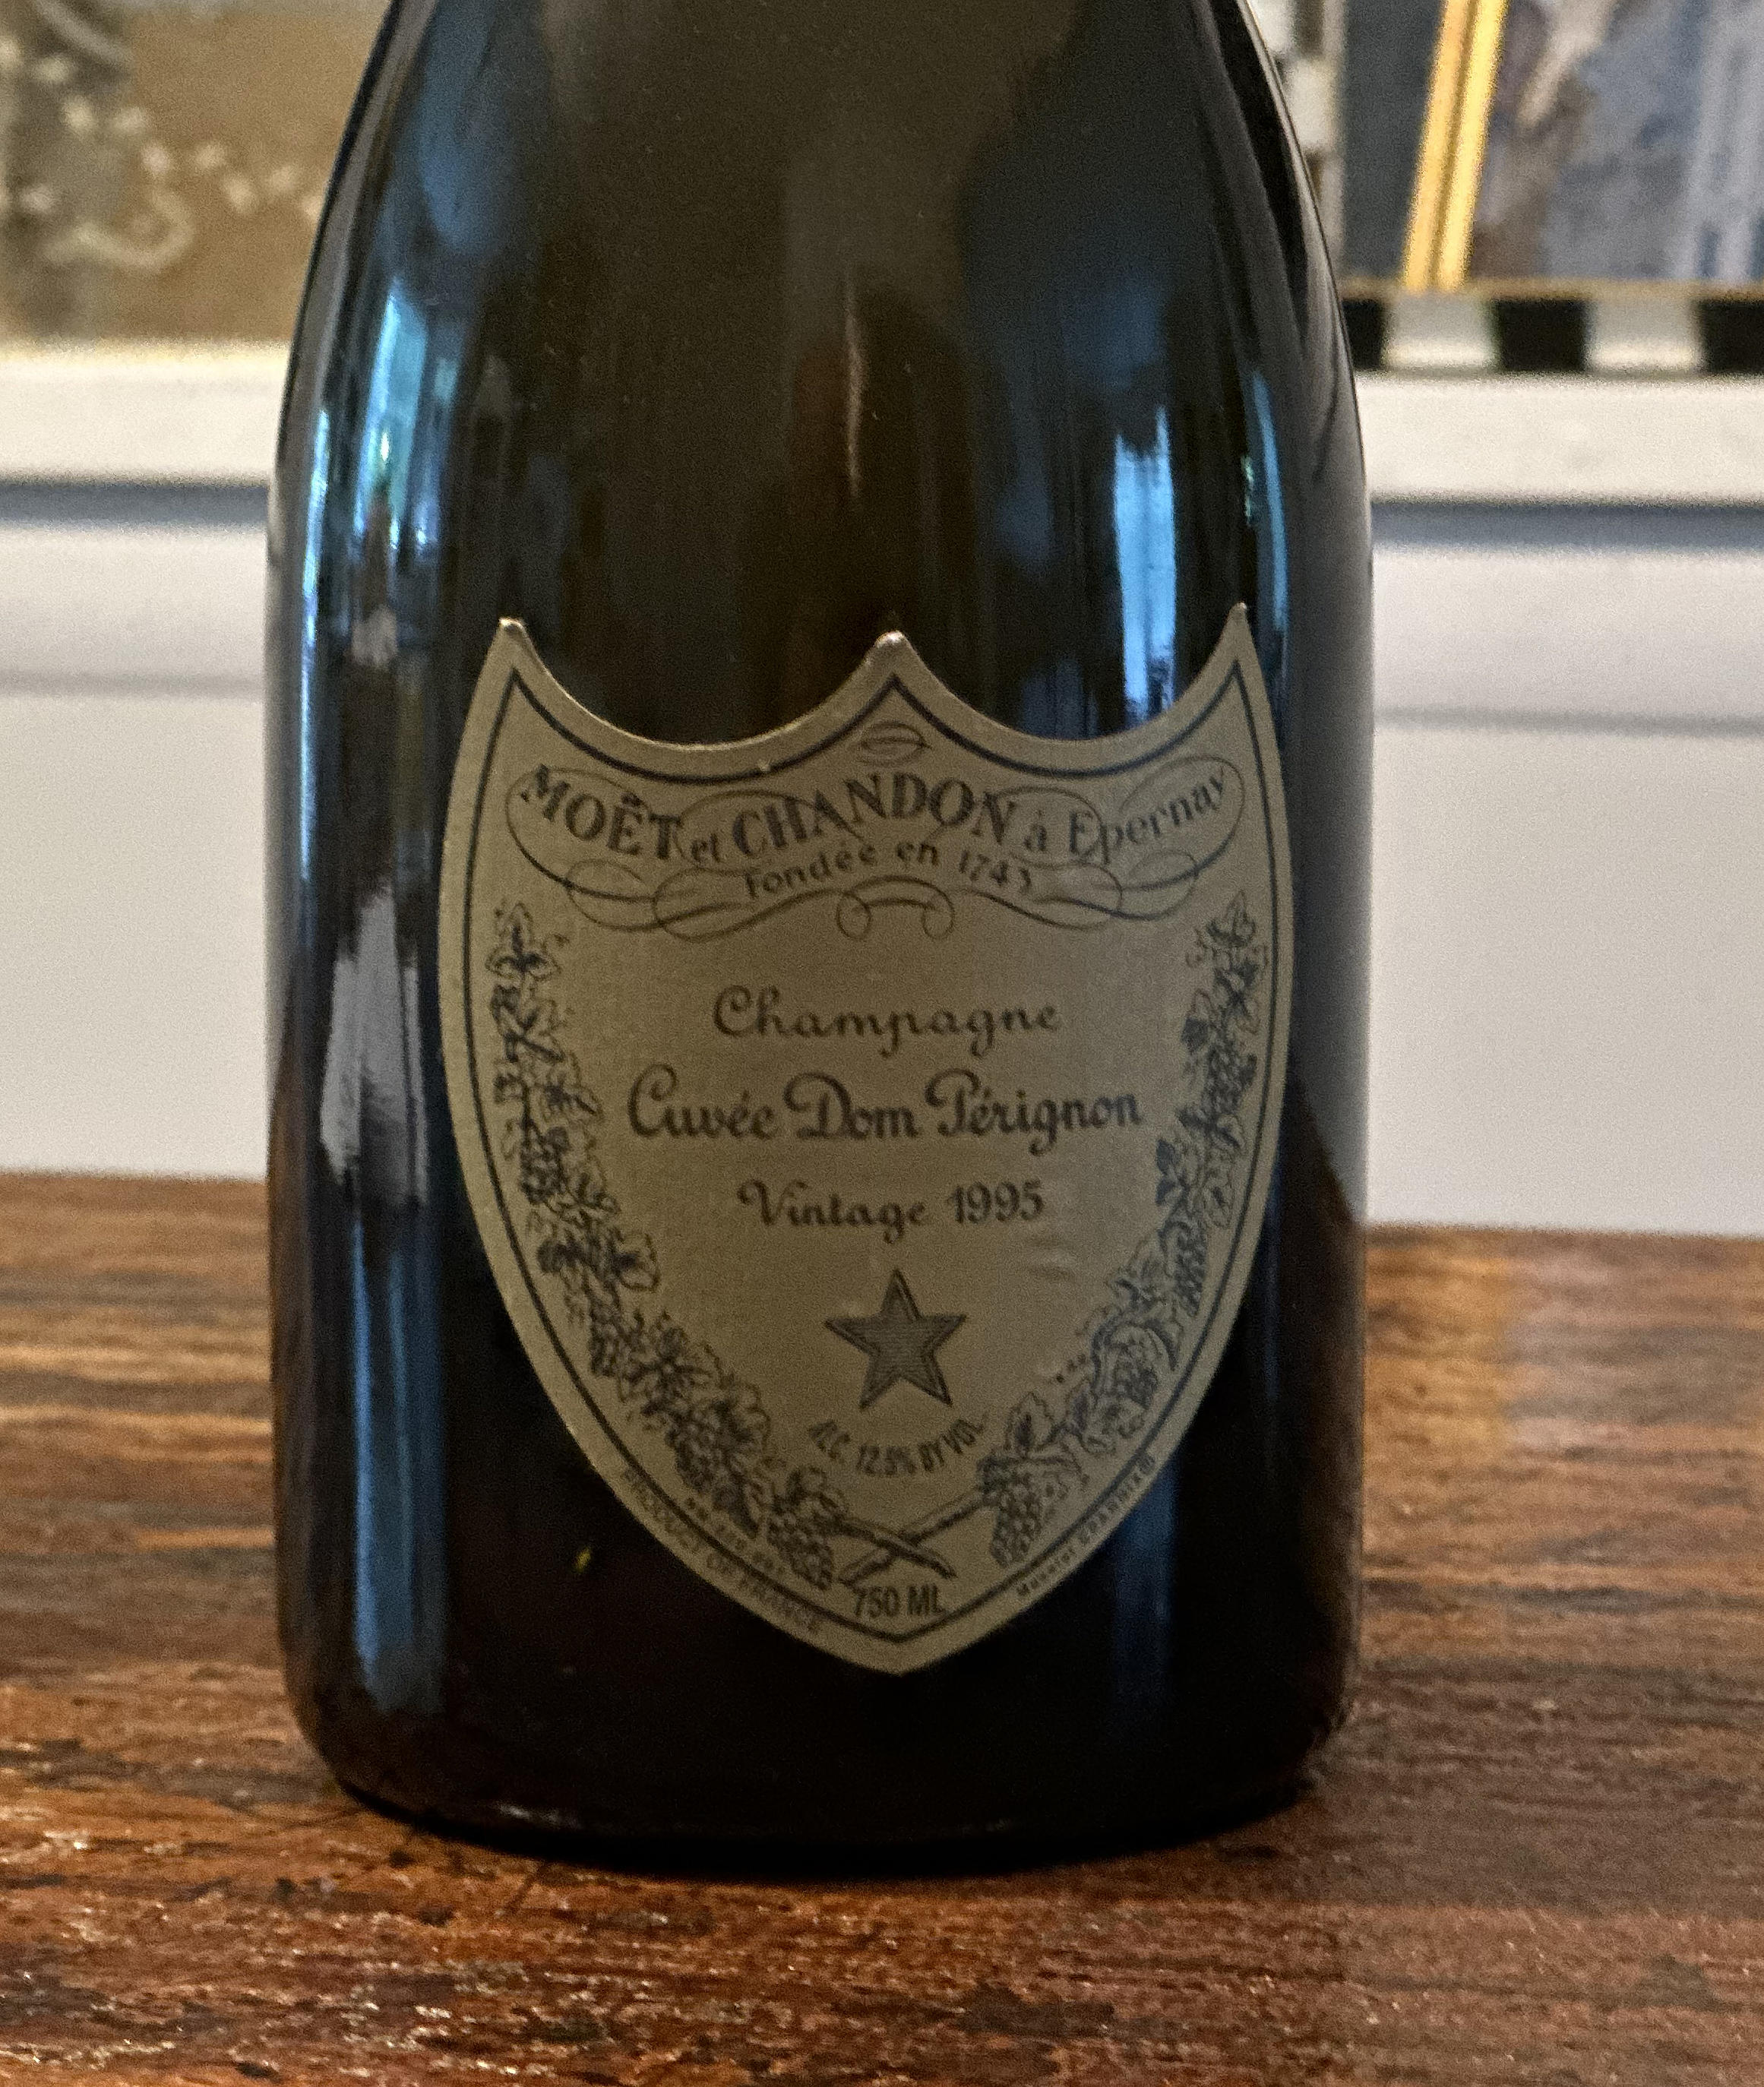 View This Rare Champagne Purchased at Upstate NY Garage Sale